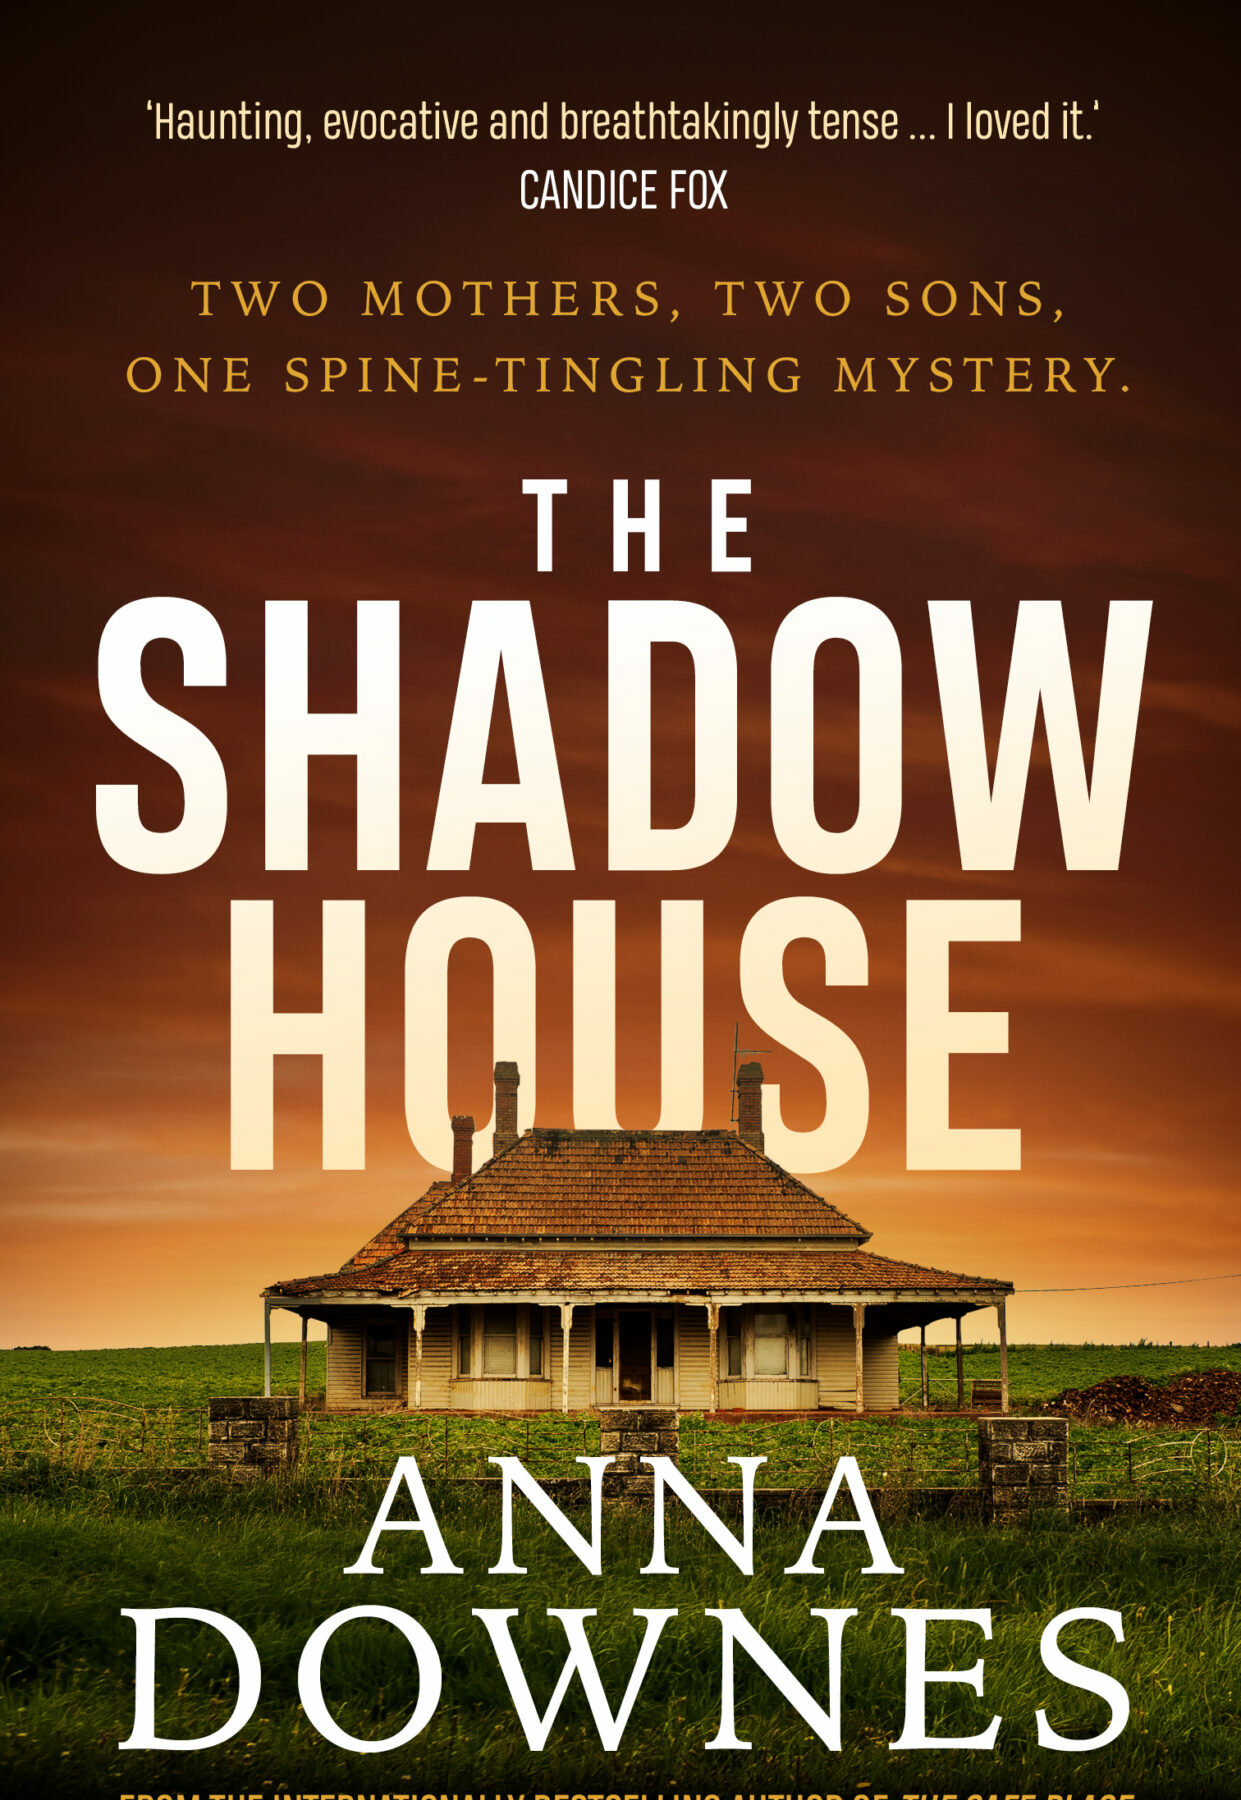 A book cover featuring an image of a house standing alone in a green field with a red sky above and the title The Shadow House in large white letters in the sky.